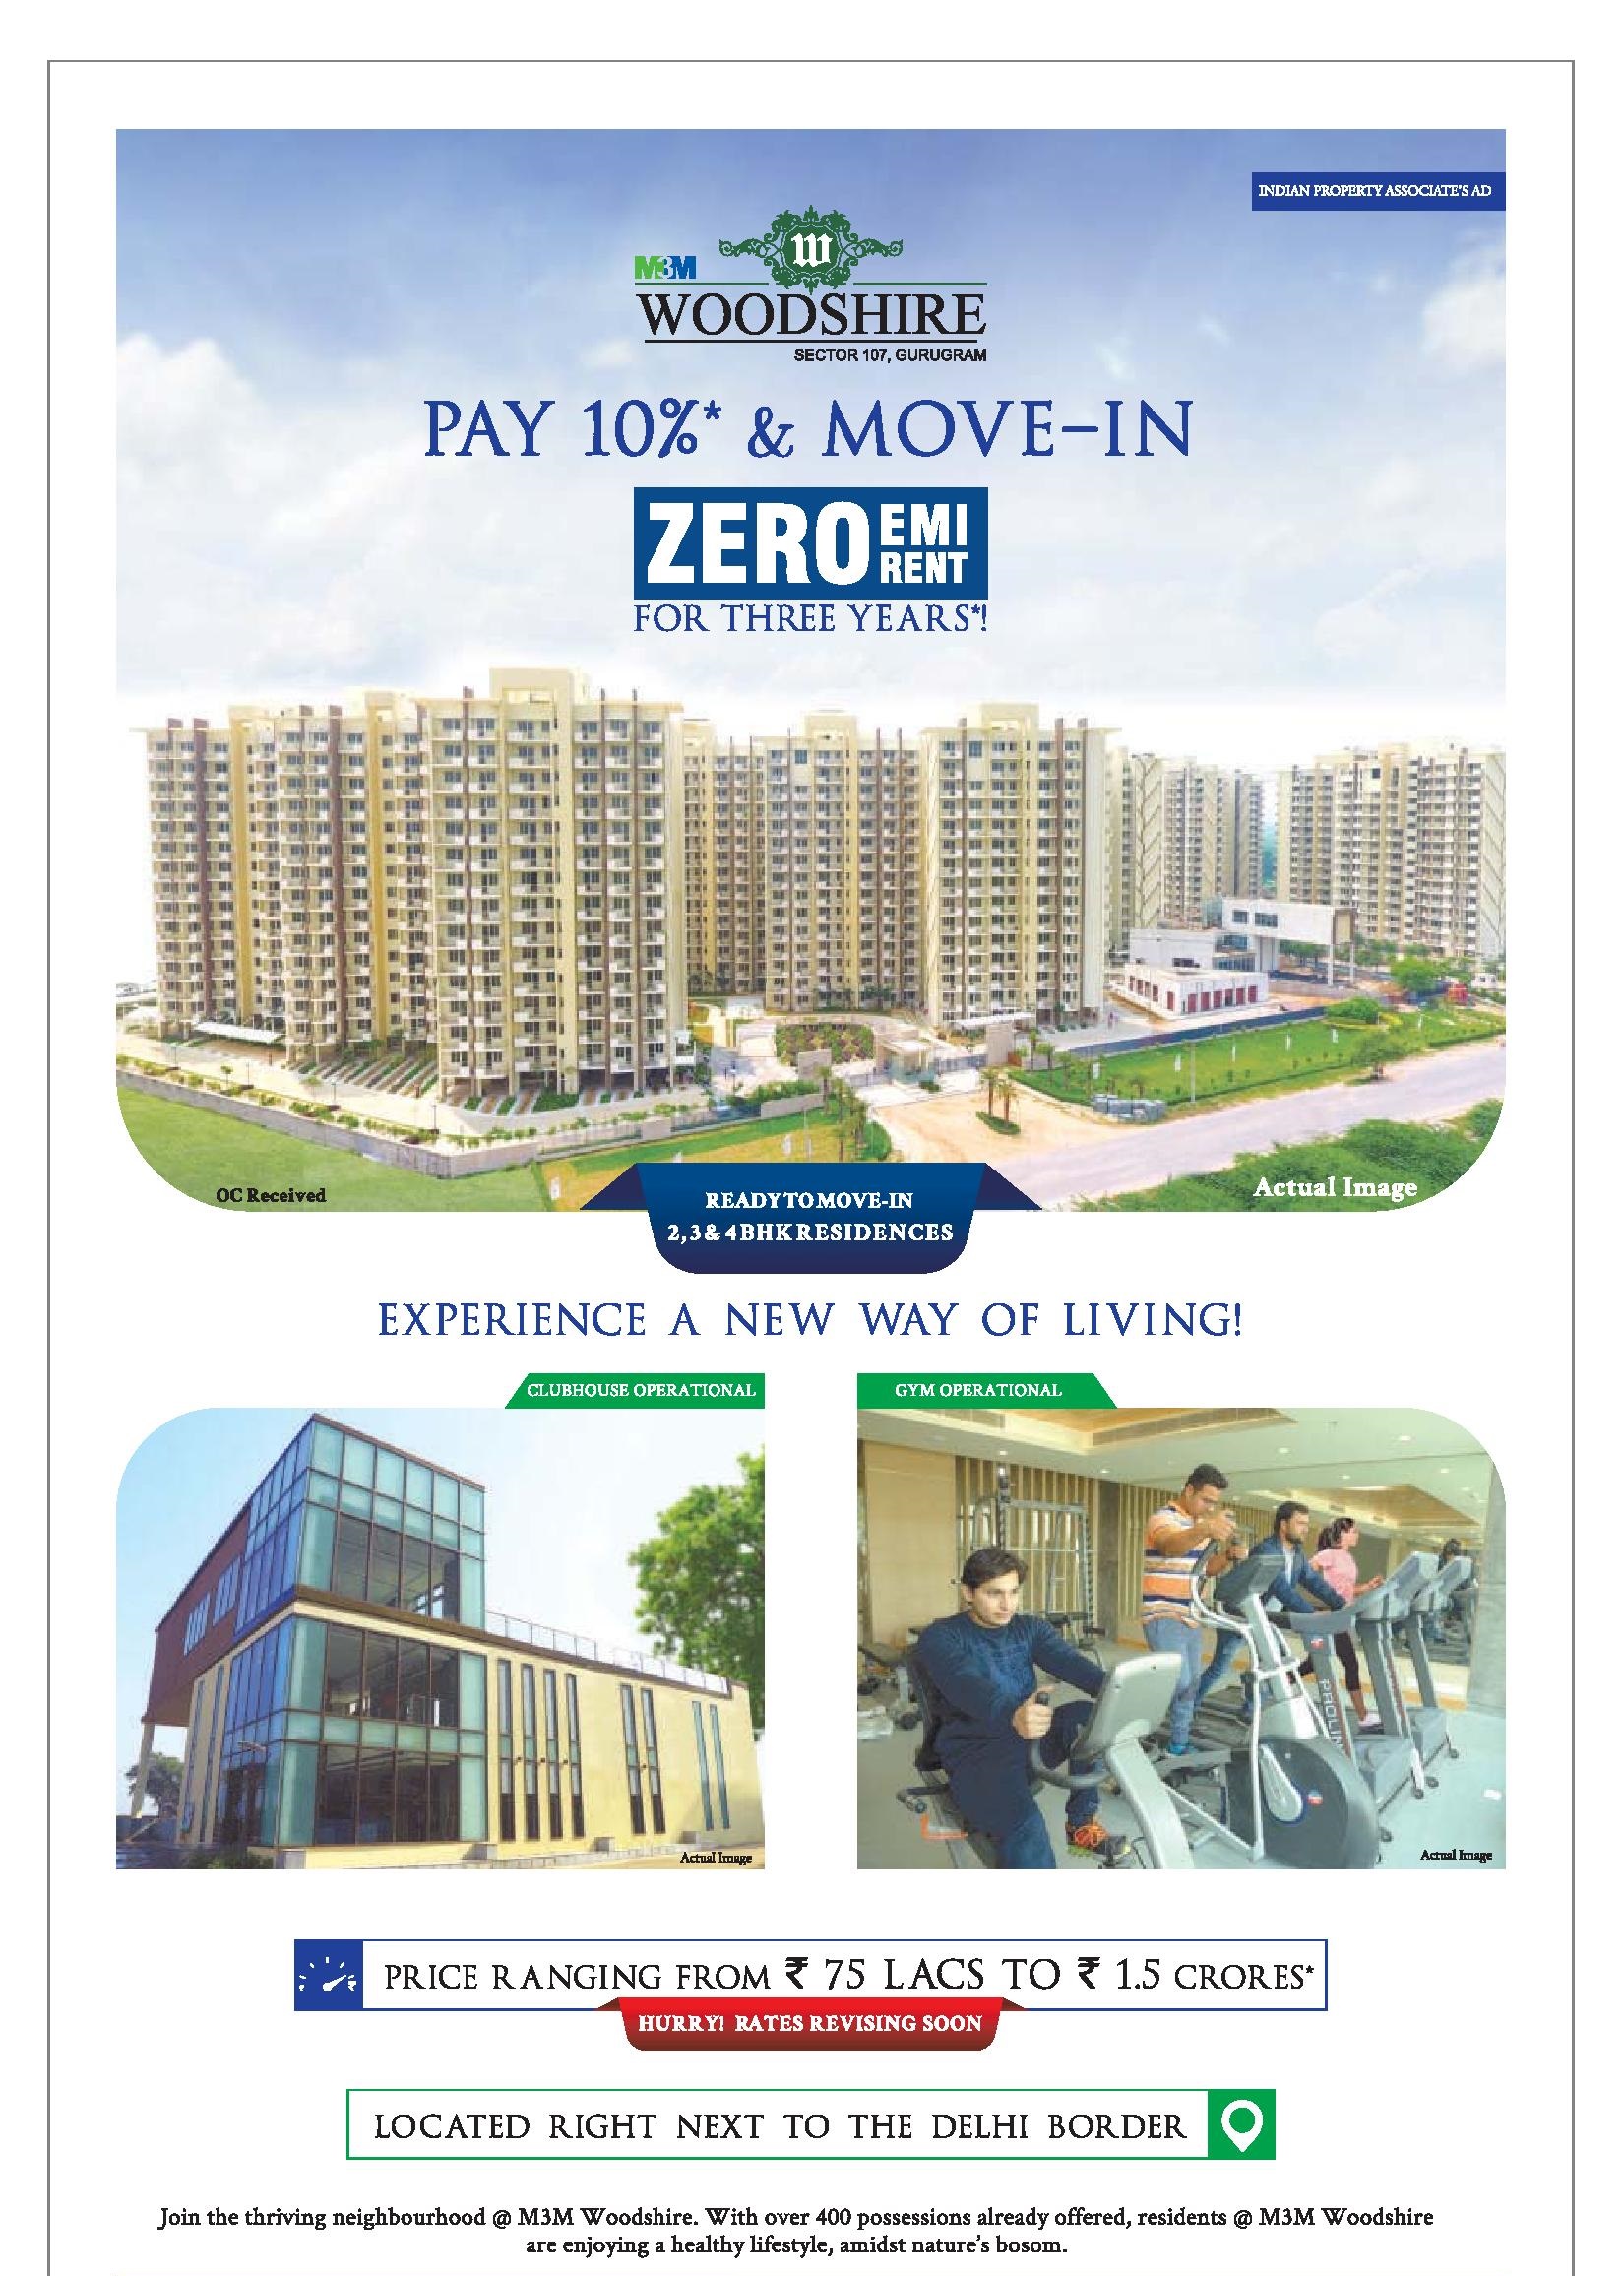 Pay just 10% & move-in at M3M Woodshire in Gurgaon